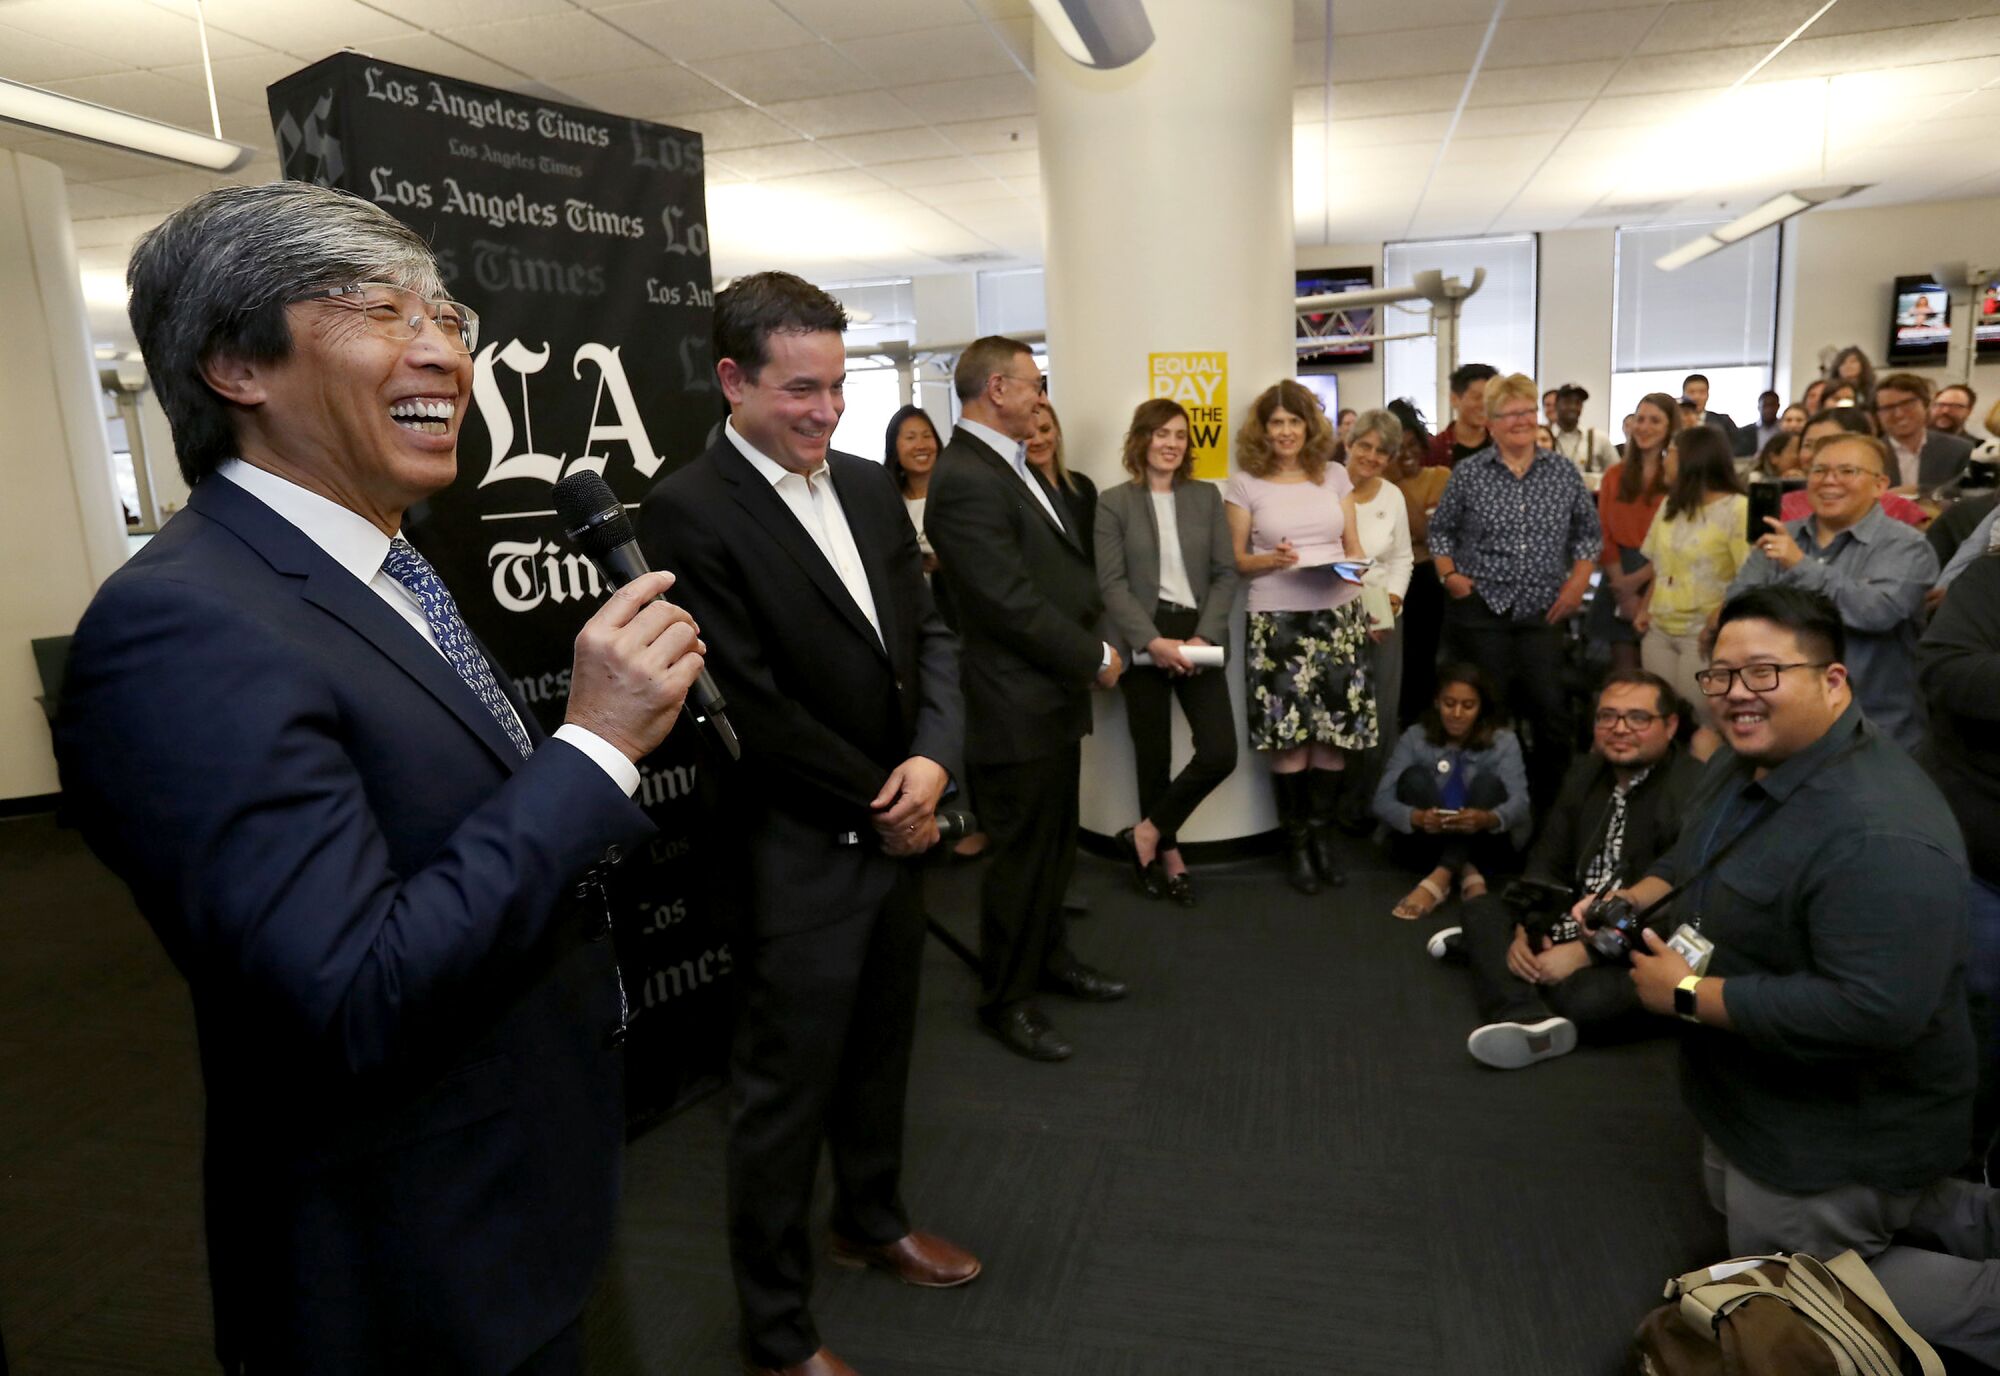 Dr. Patrick Soon-Shiong smiles as he speaks into a microphone in the Los Angeles Times newsroom